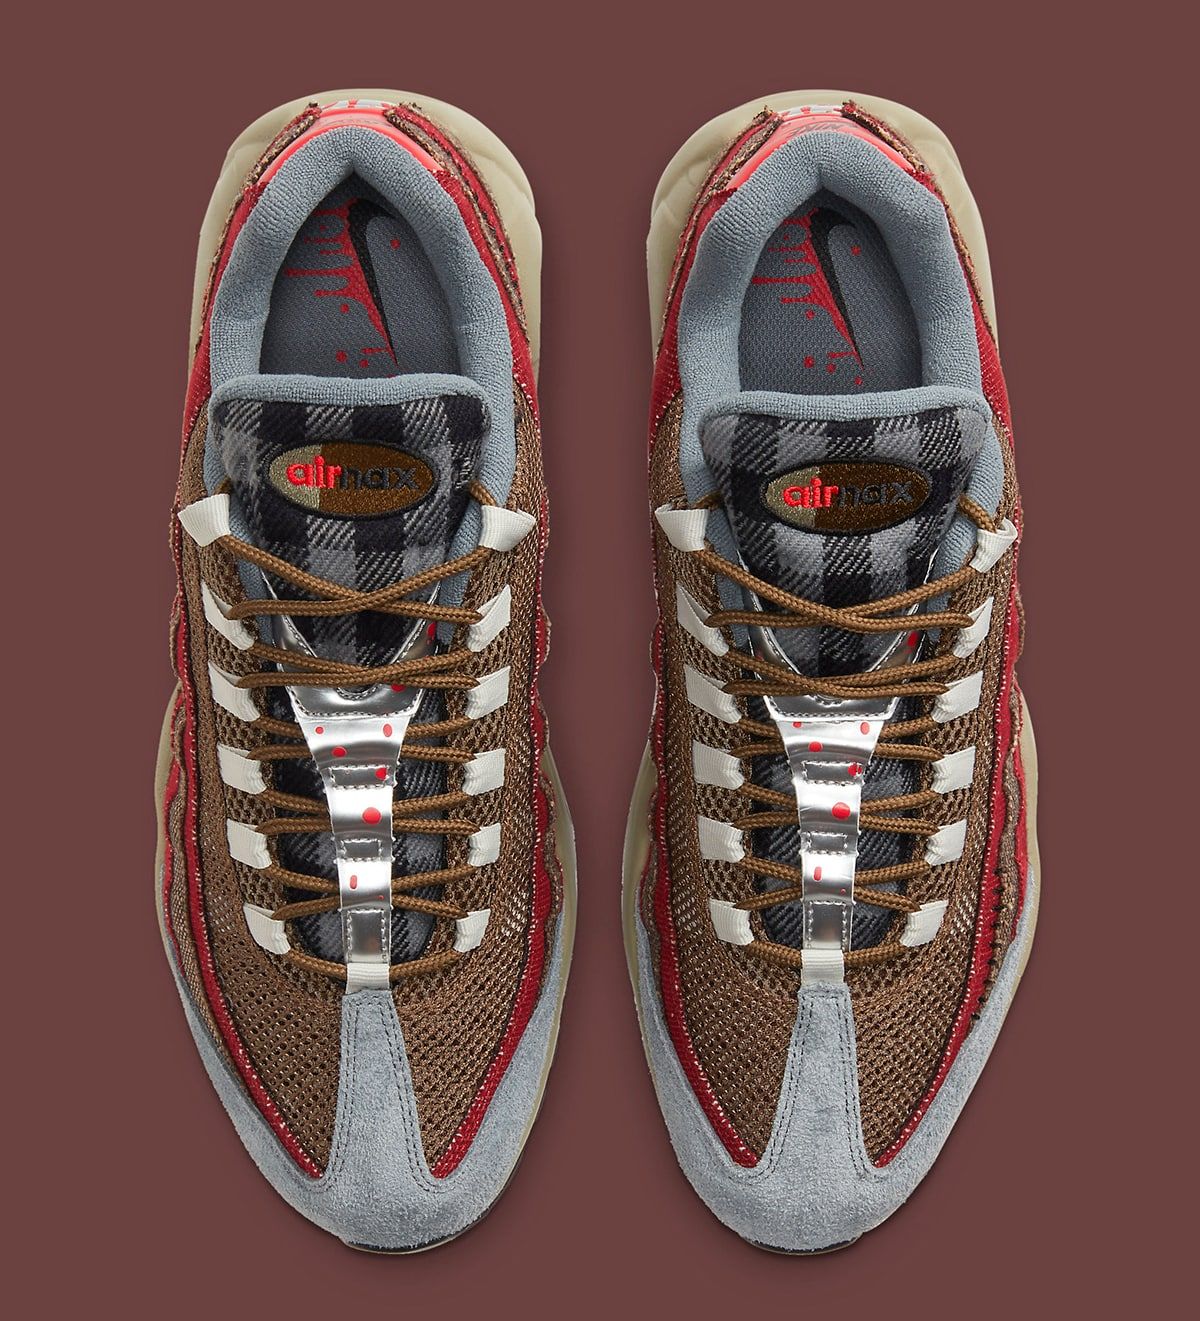 Where to Buy the Nike Air Max 95 “Freddy Krueger” | House of Heat°